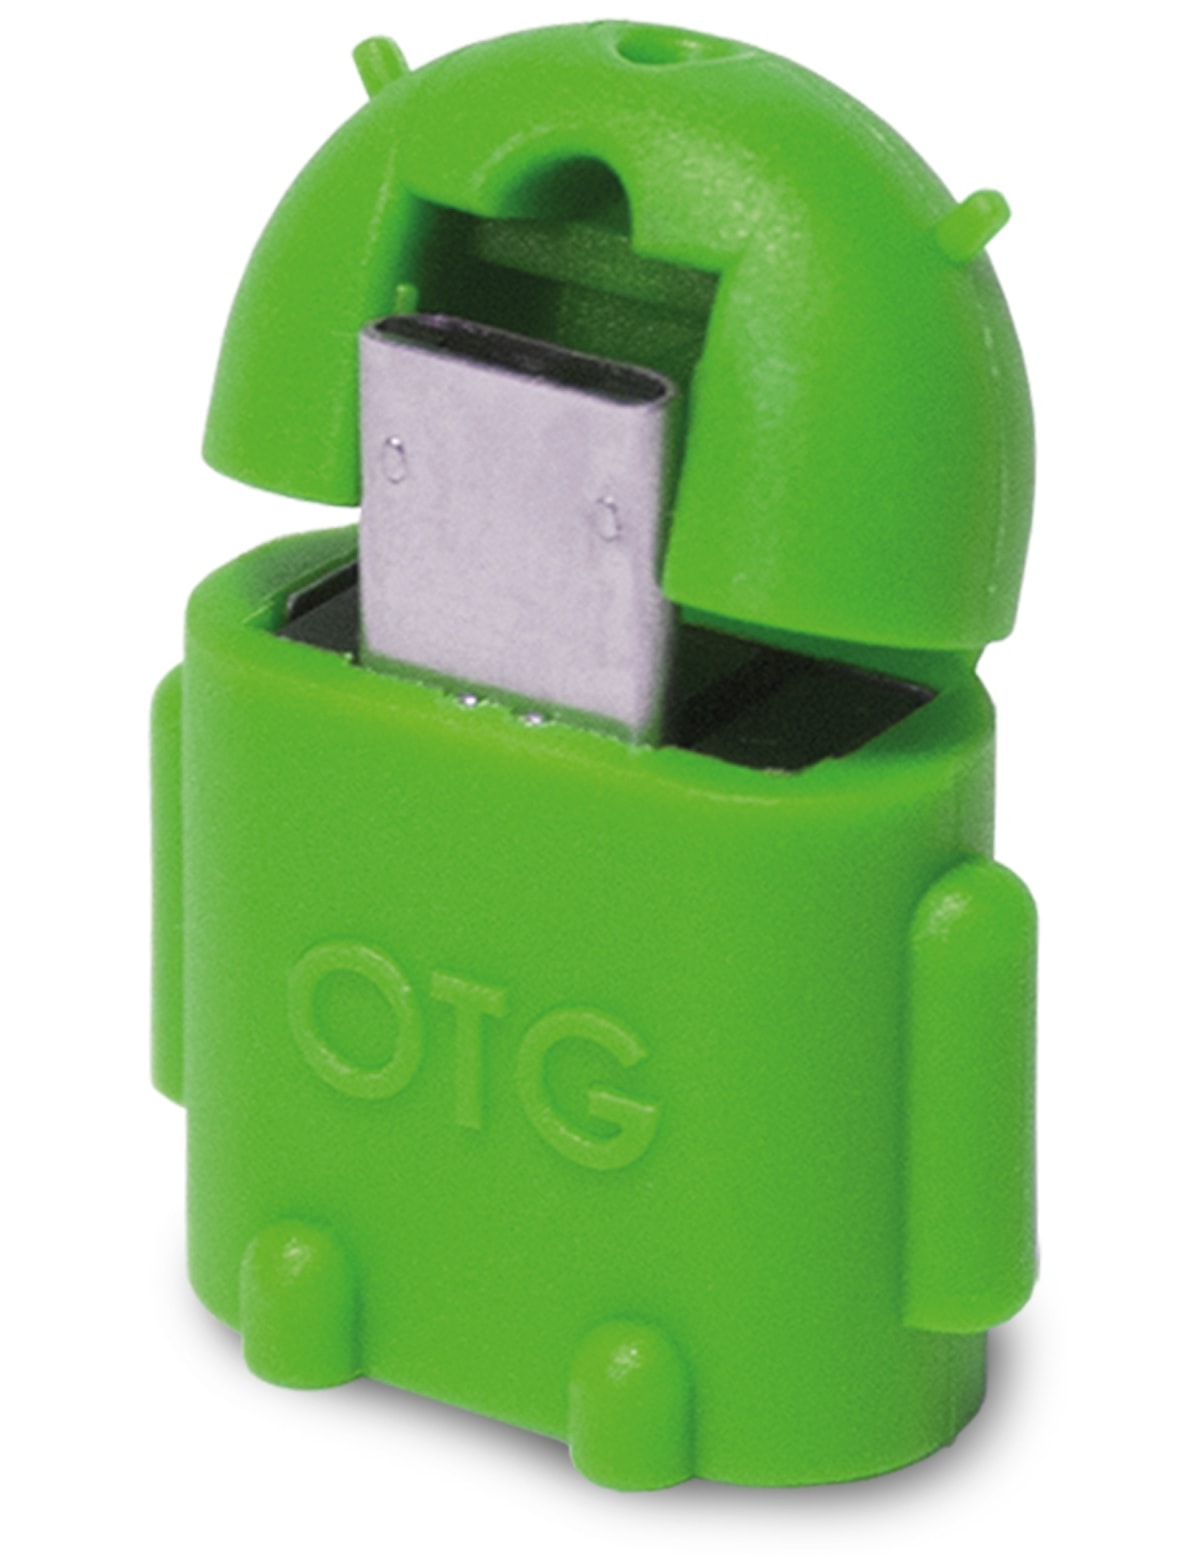 OTG-Adapter mit Micro-B Stecker, Android